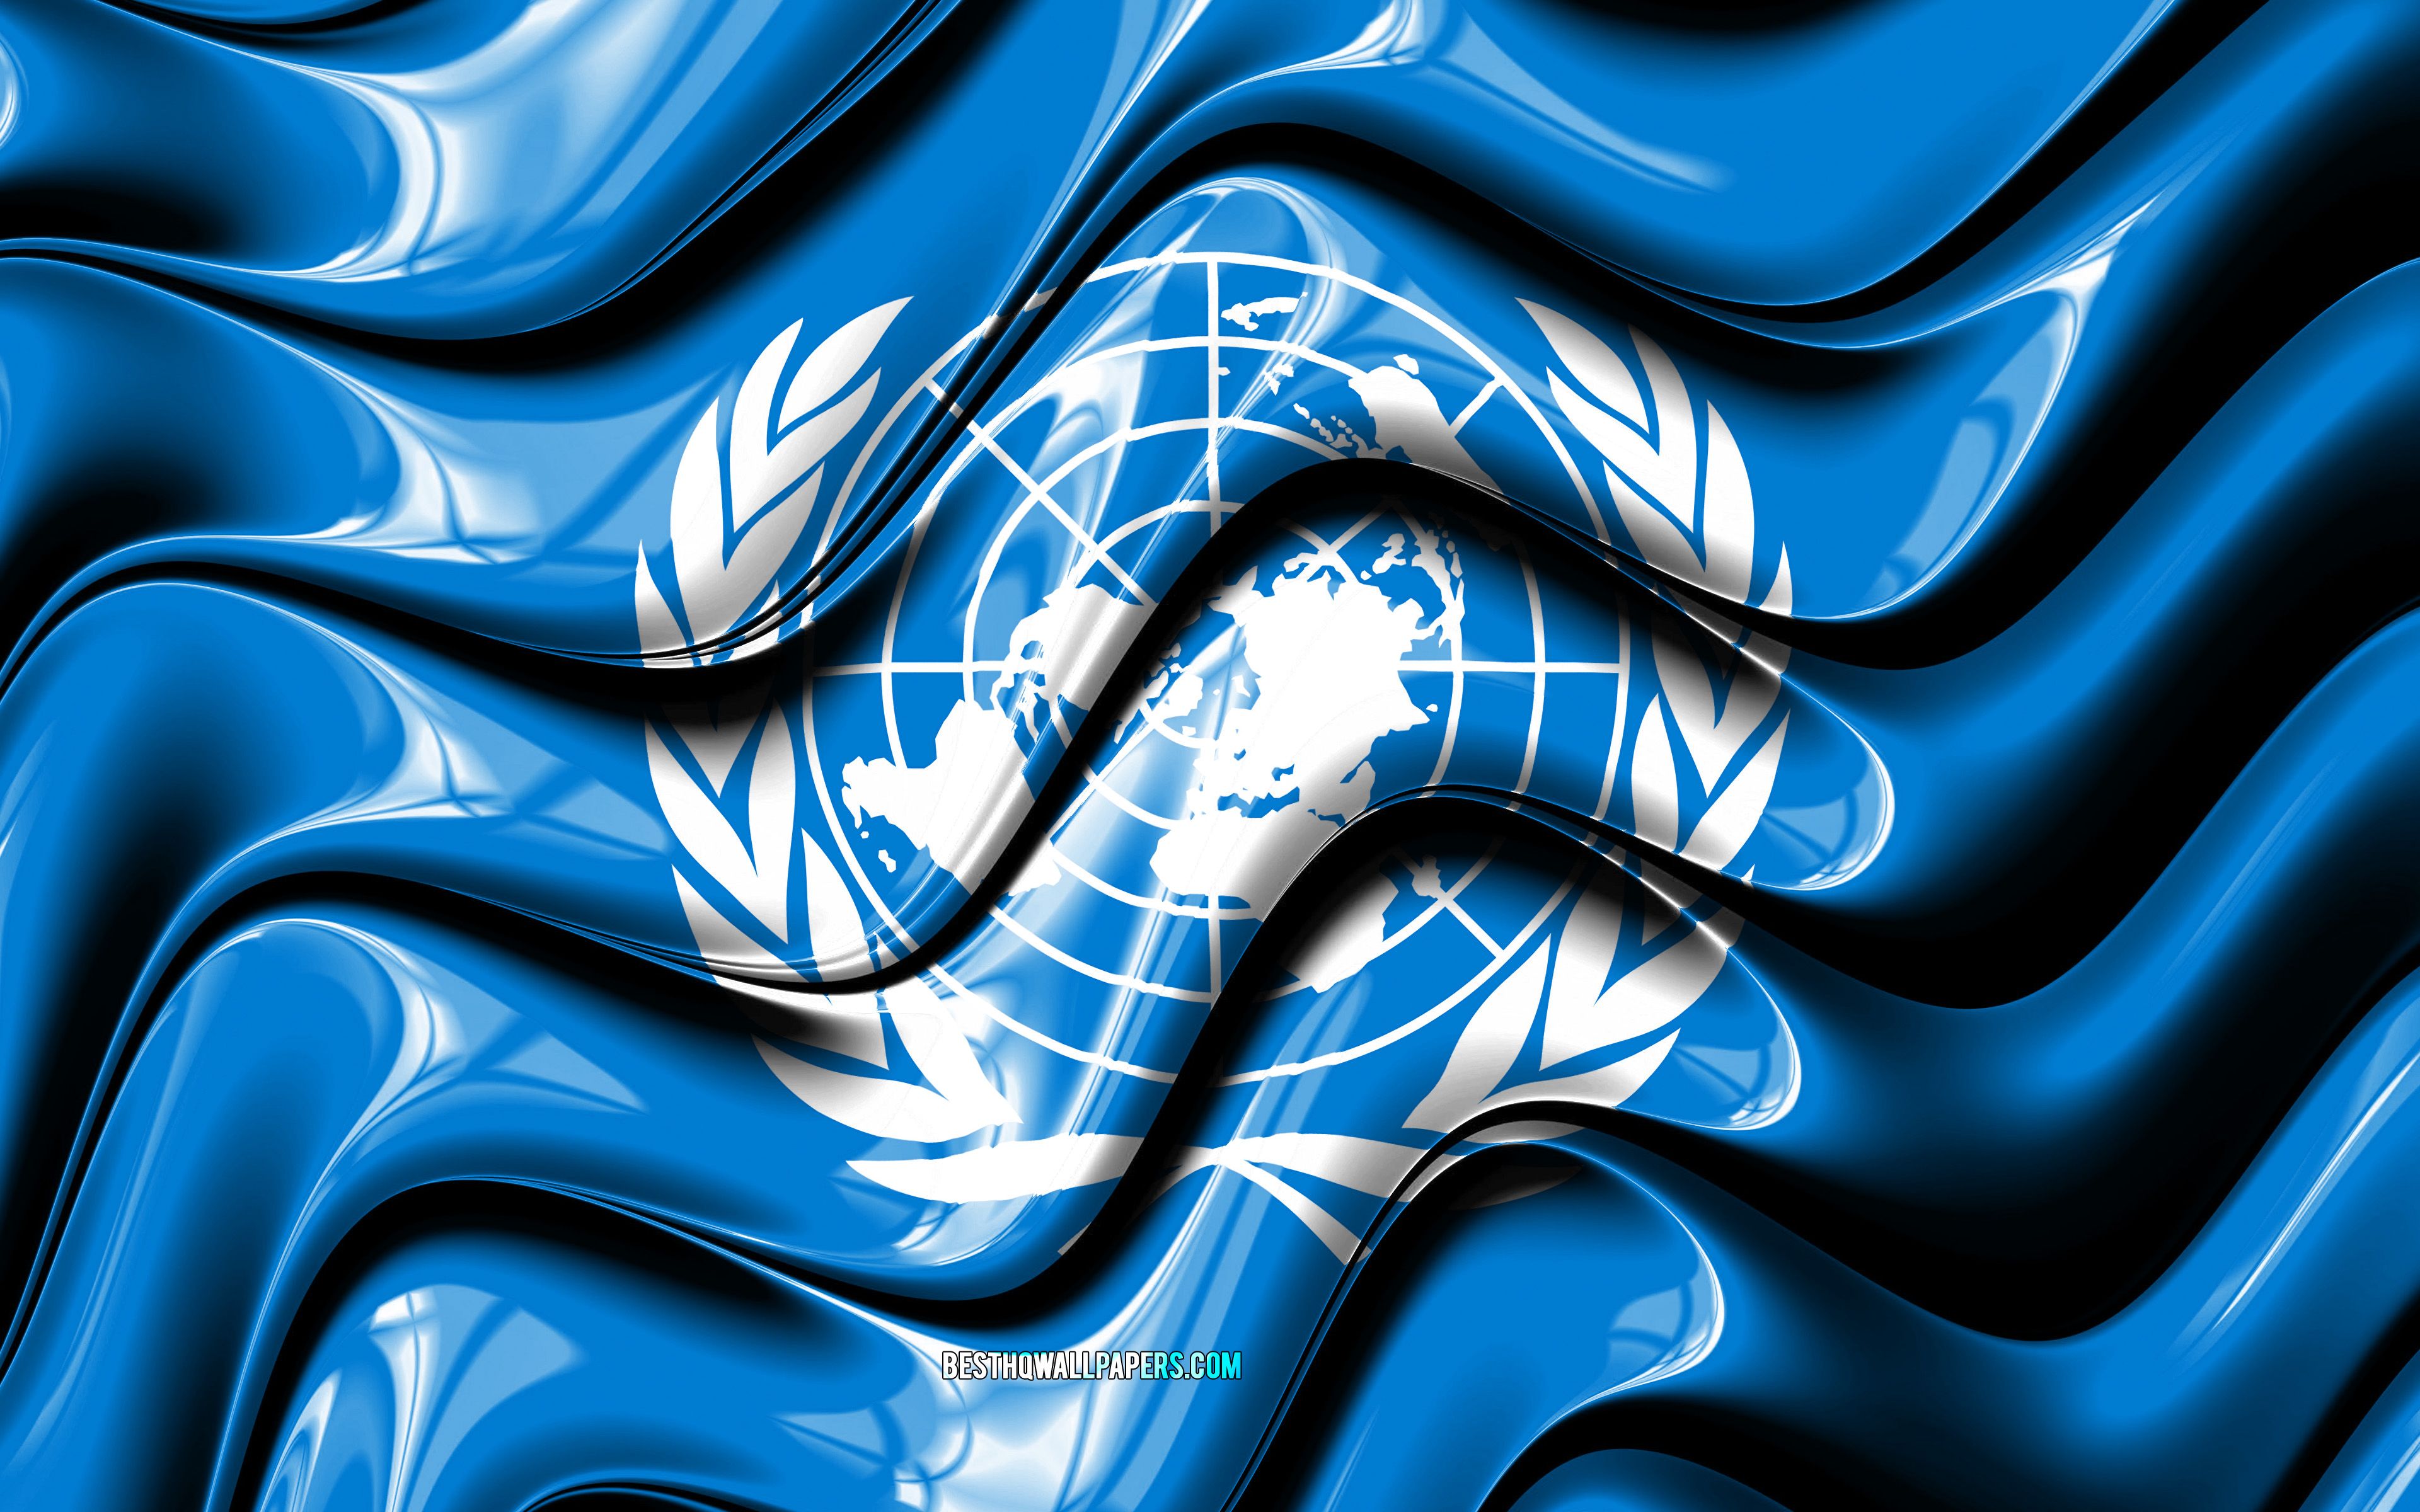 Download wallpaper United Nations flag, 4k, global organization, Flag of United Nations, 3D art, UN, Flag of UN, United Nations 3D flag, UN flag for desktop with resolution 3840x2400. High Quality HD